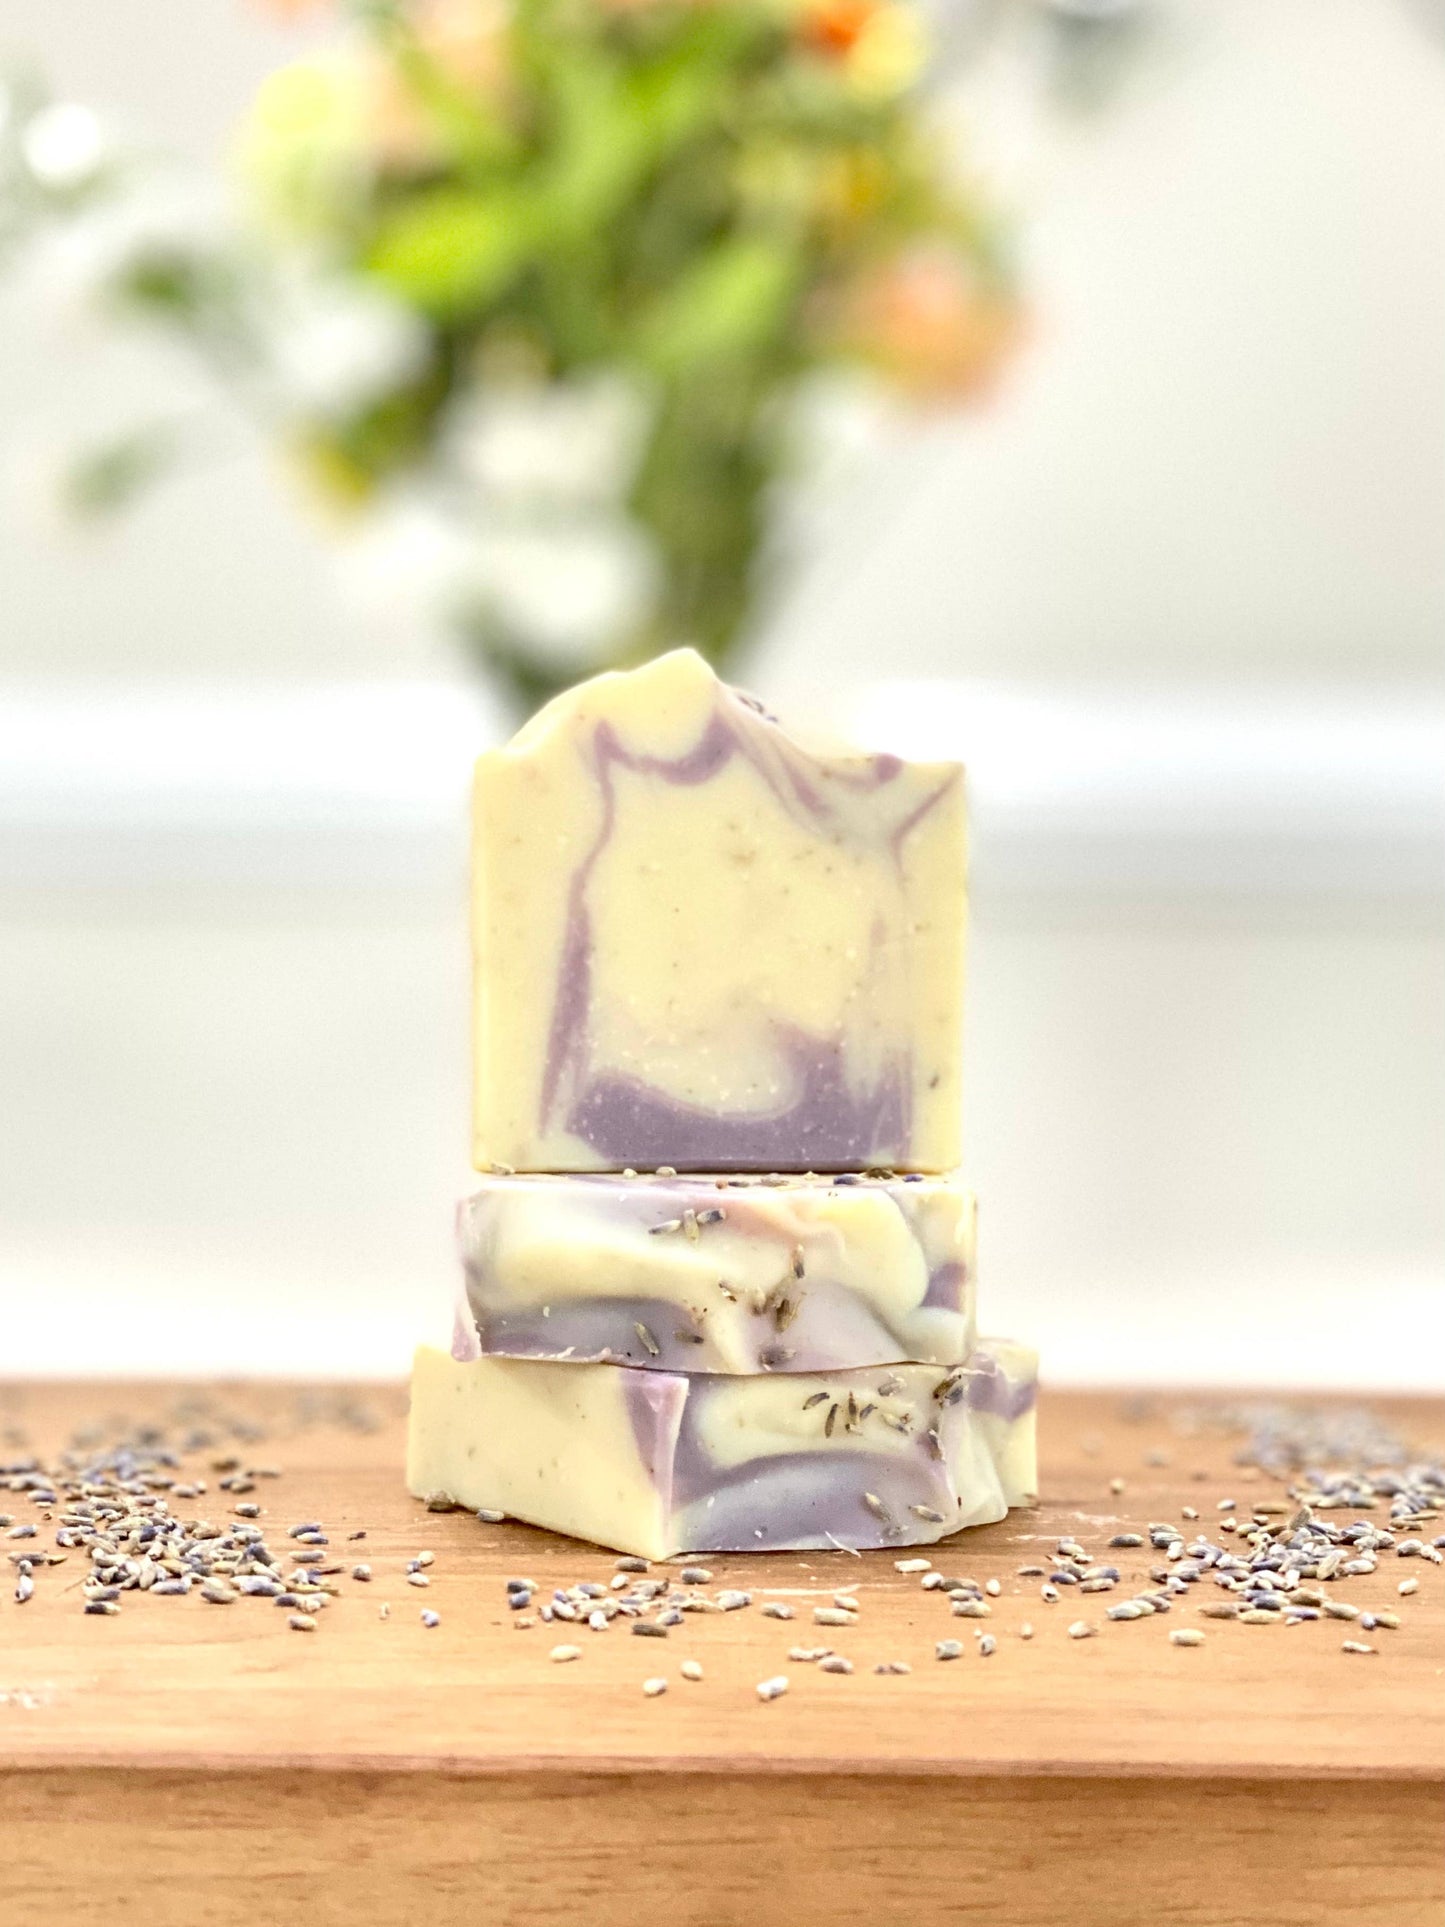 5 oz Lavender with Lavender Buds Handcrafted Soap - Pluff Mud Mercantile